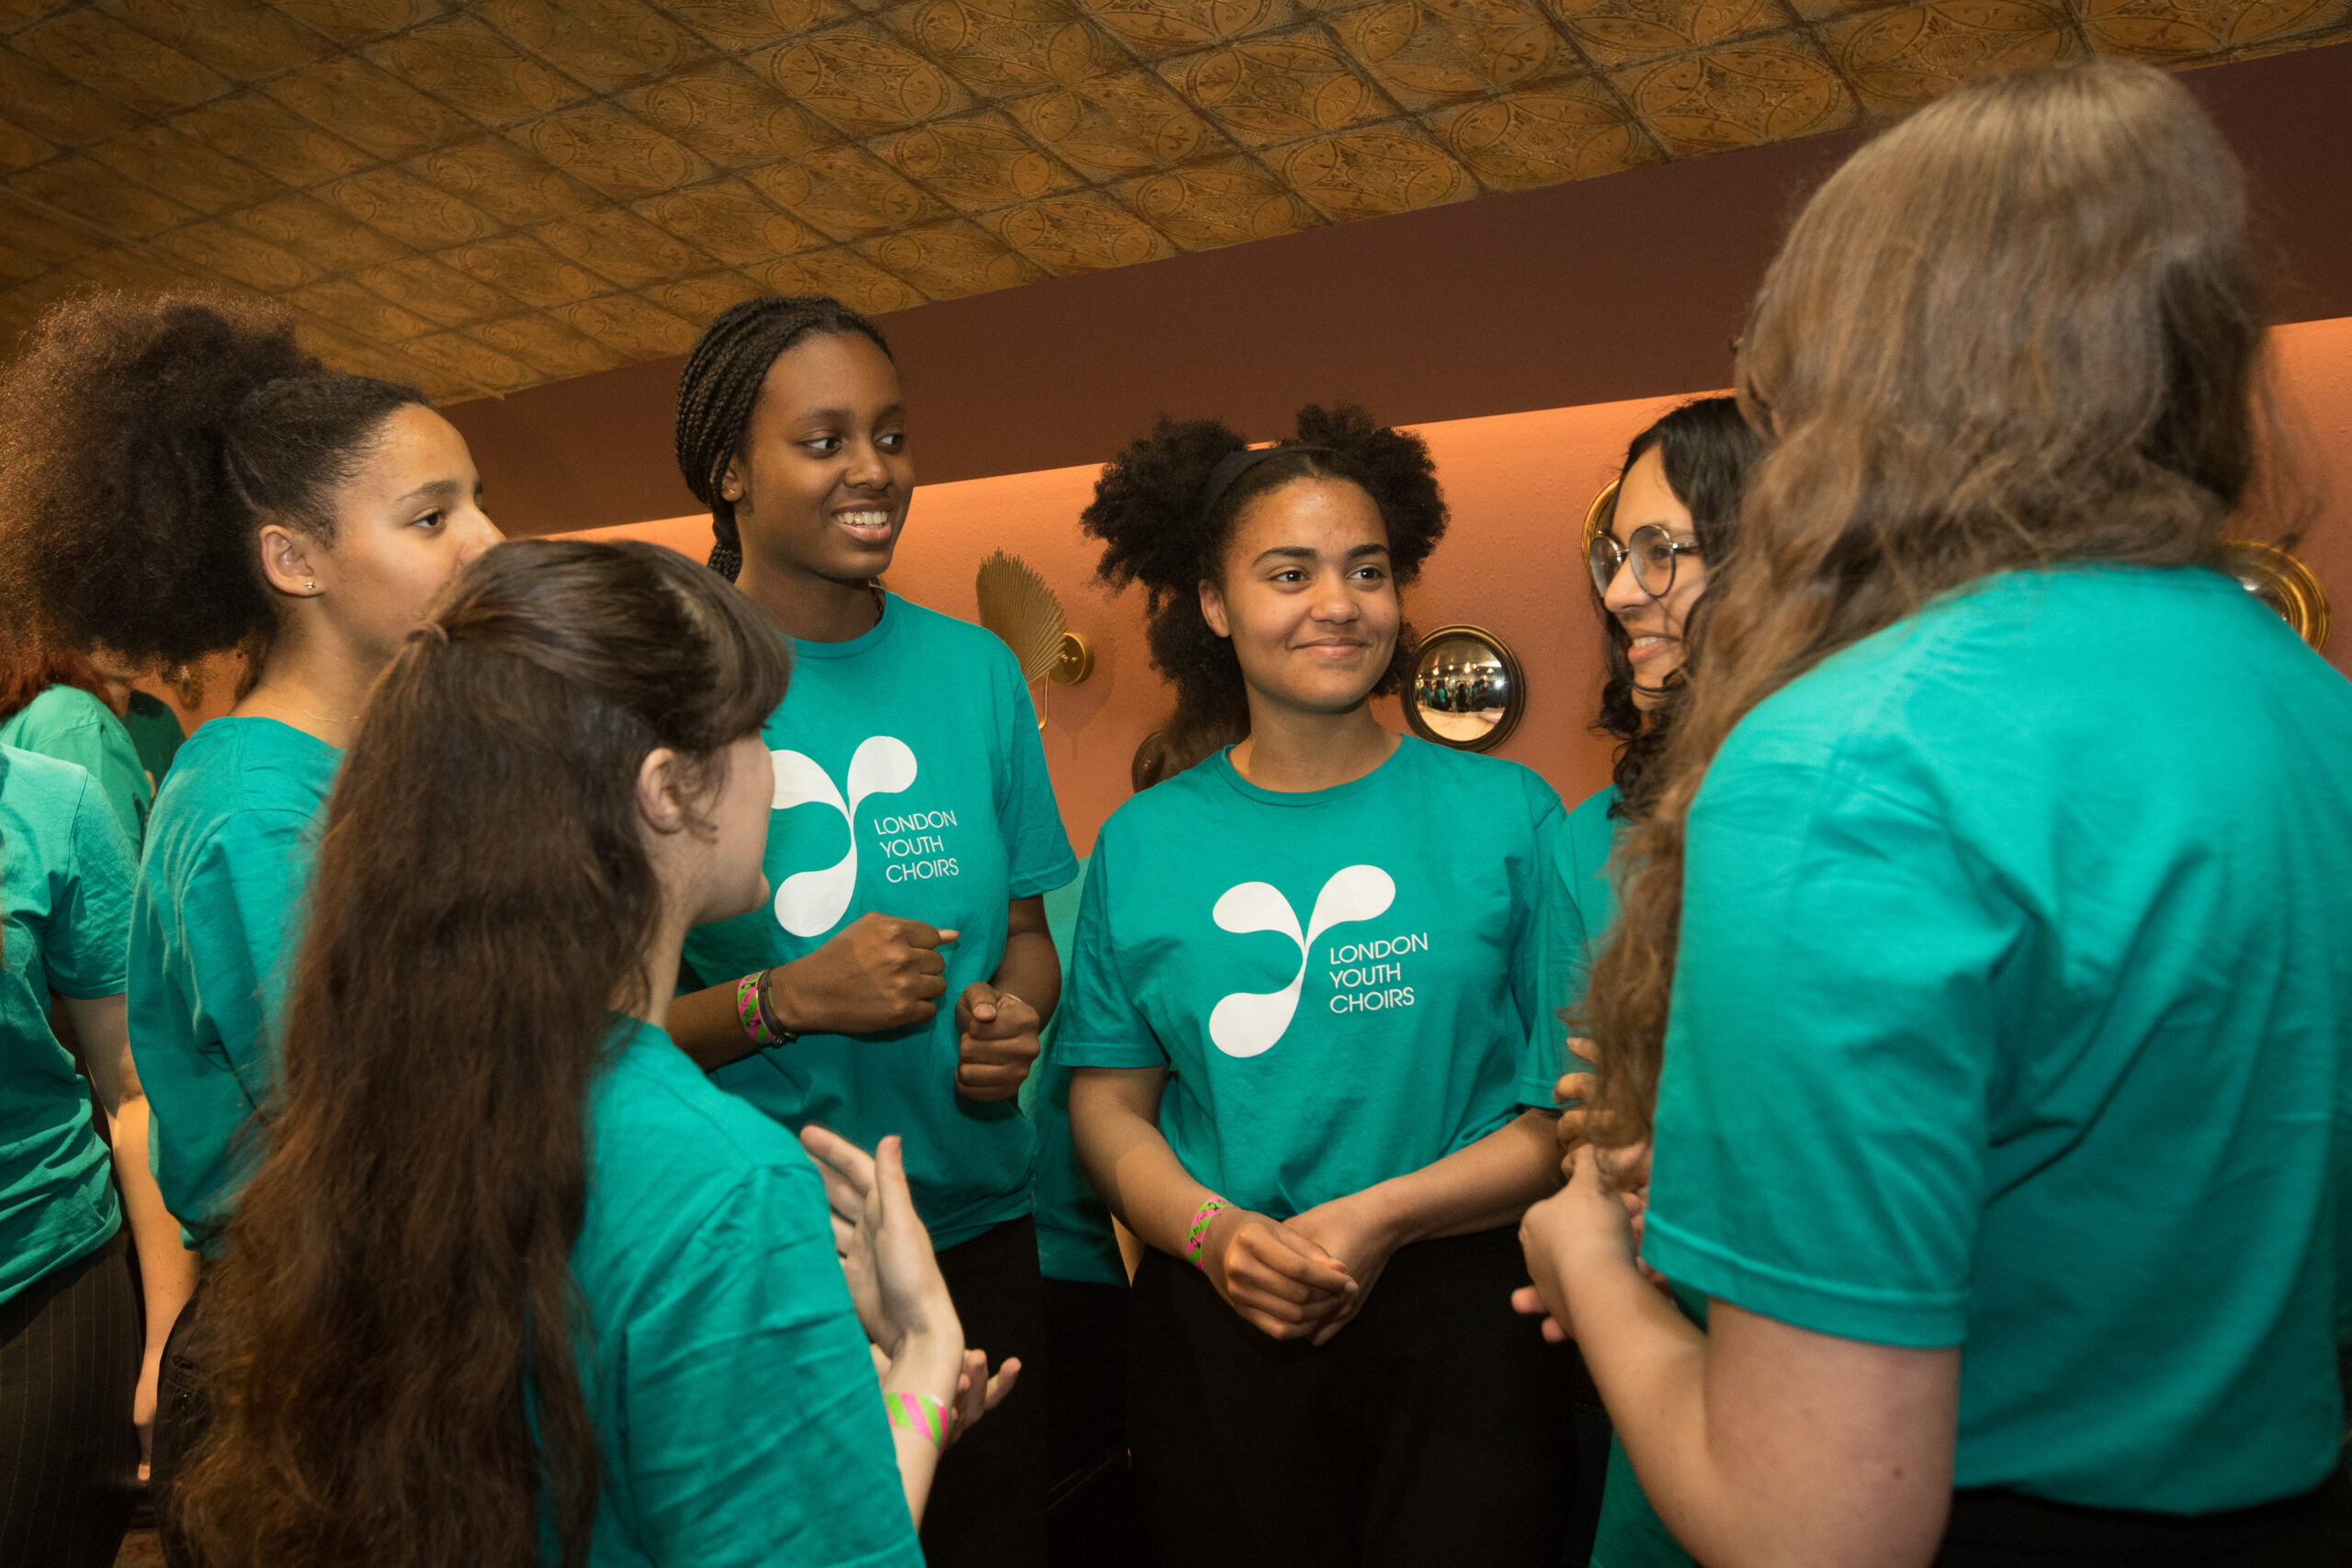 A group of 6 LYC members, age 16-23 and female, stood in a circle chatting, wearing teal LYC T shirts